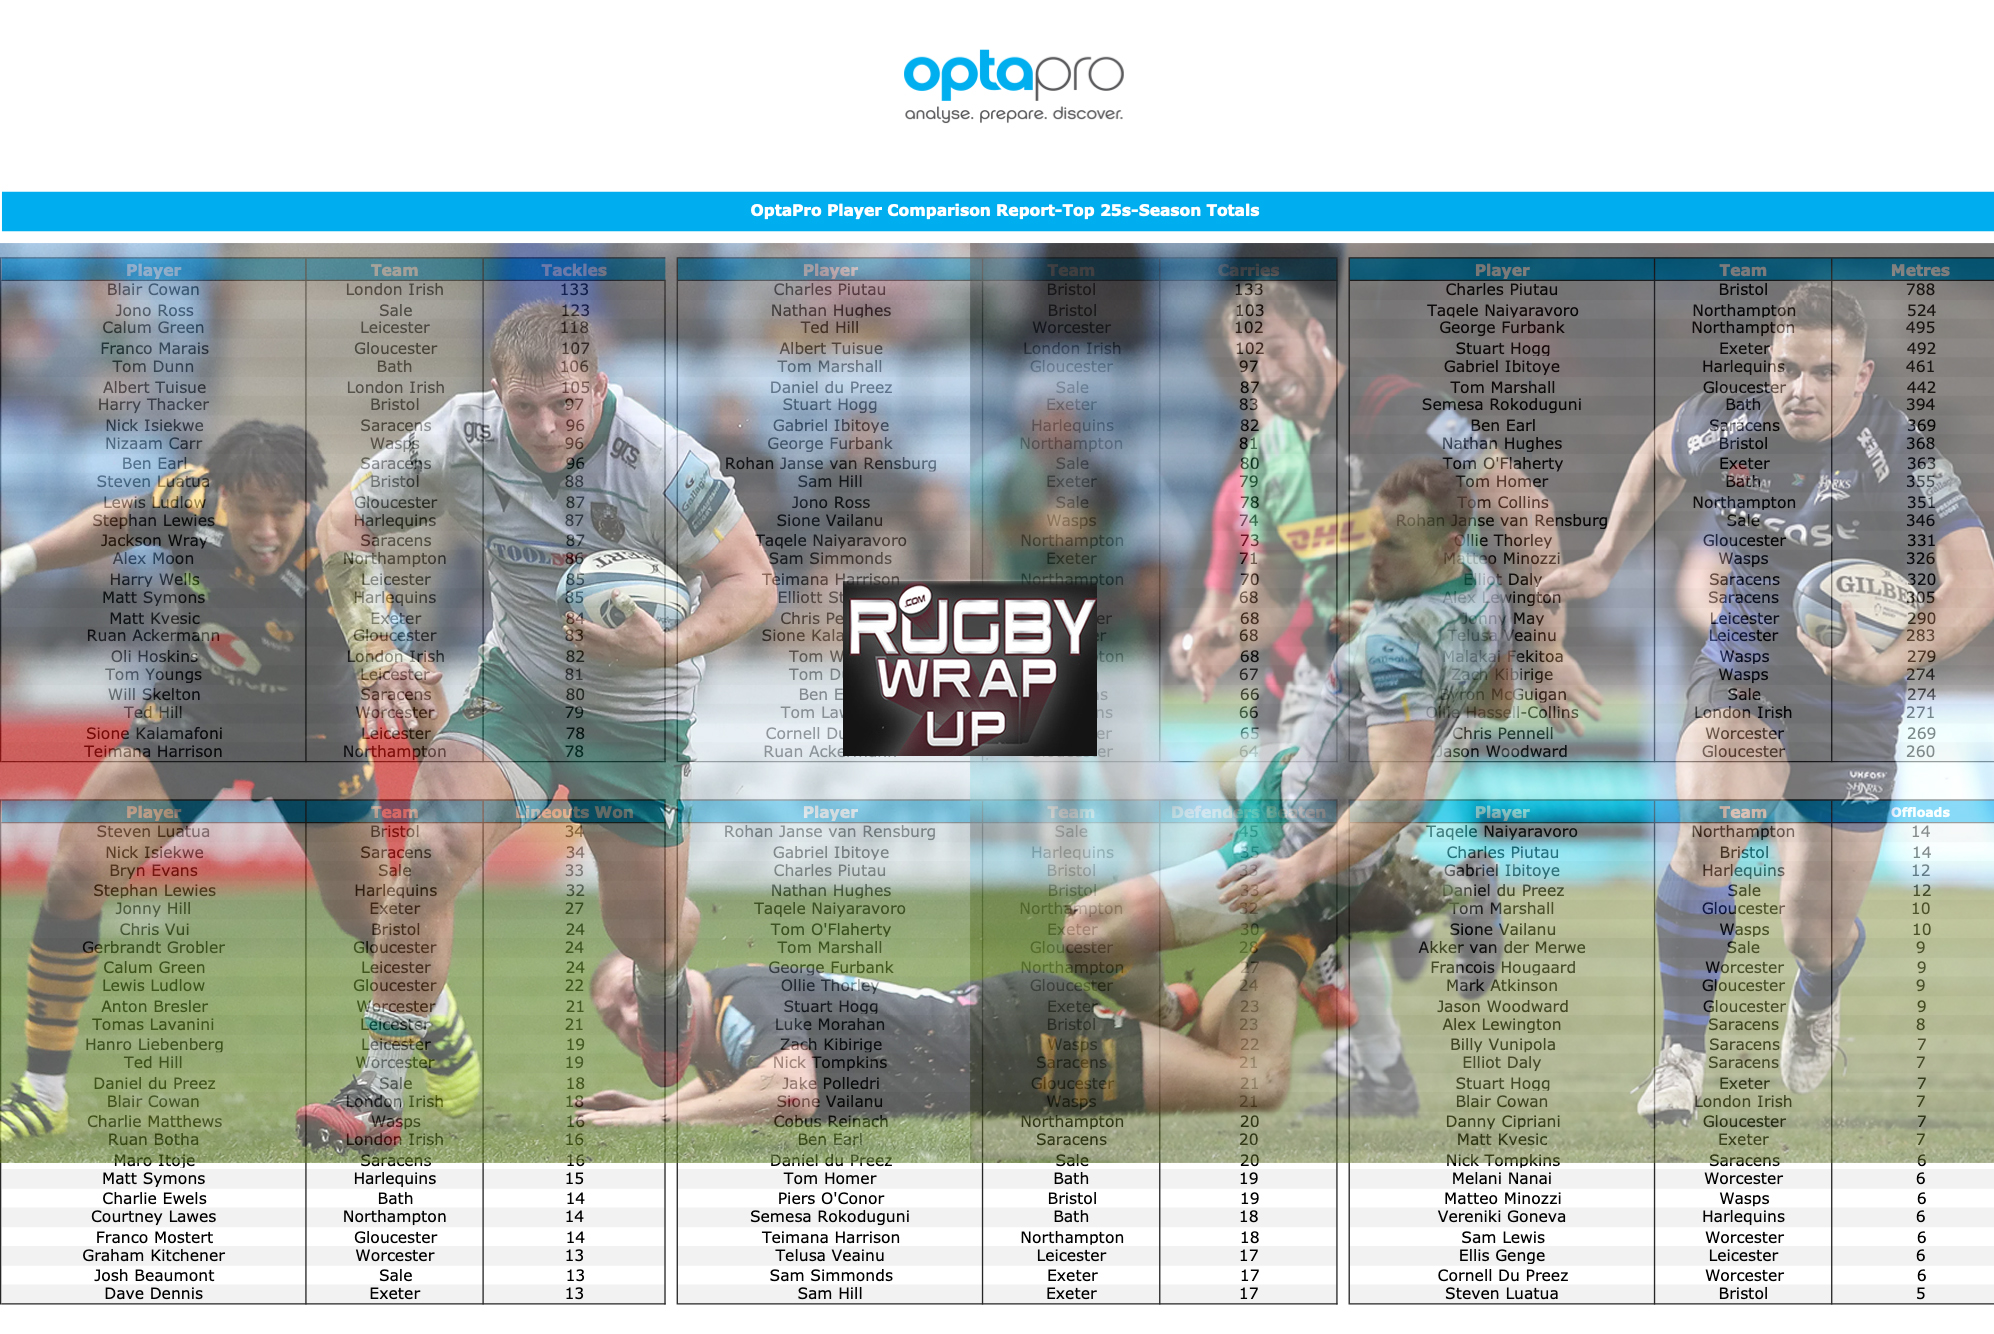 Rugby_Wrap_Up, Gallagher_Premiership, Opta Pro